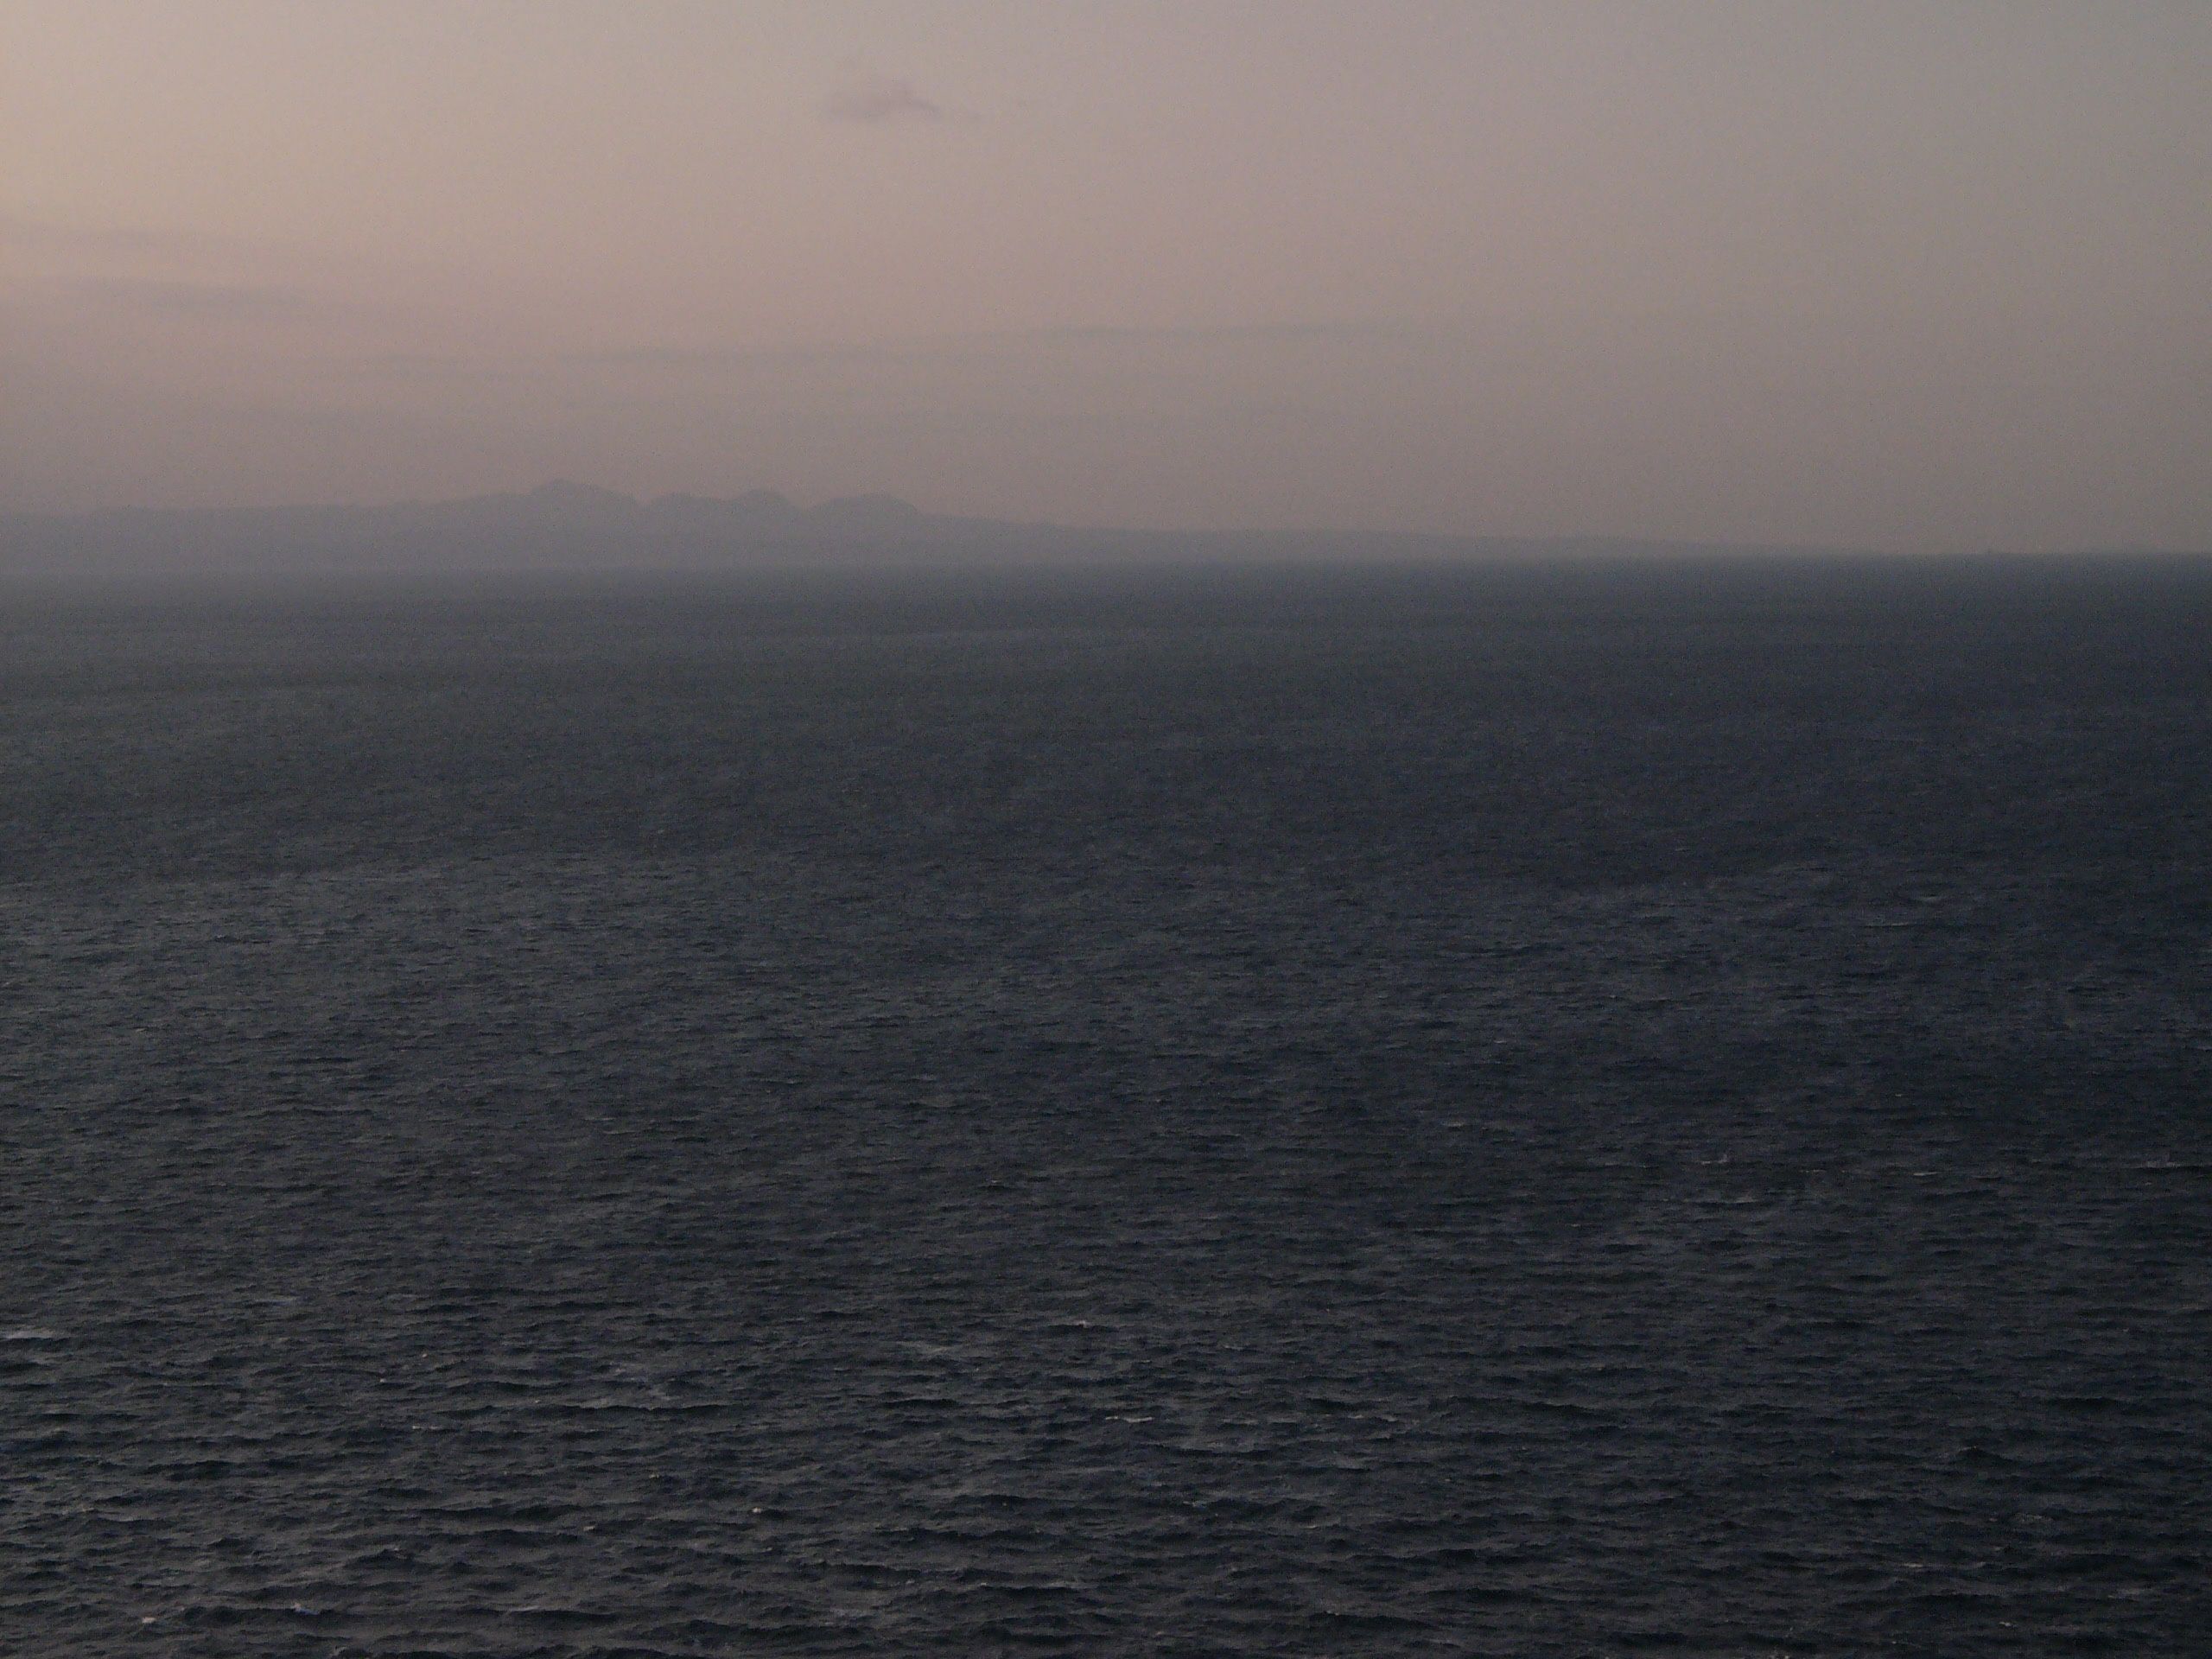 The silhouette of a low, craggy mountain across the sea at dusk.